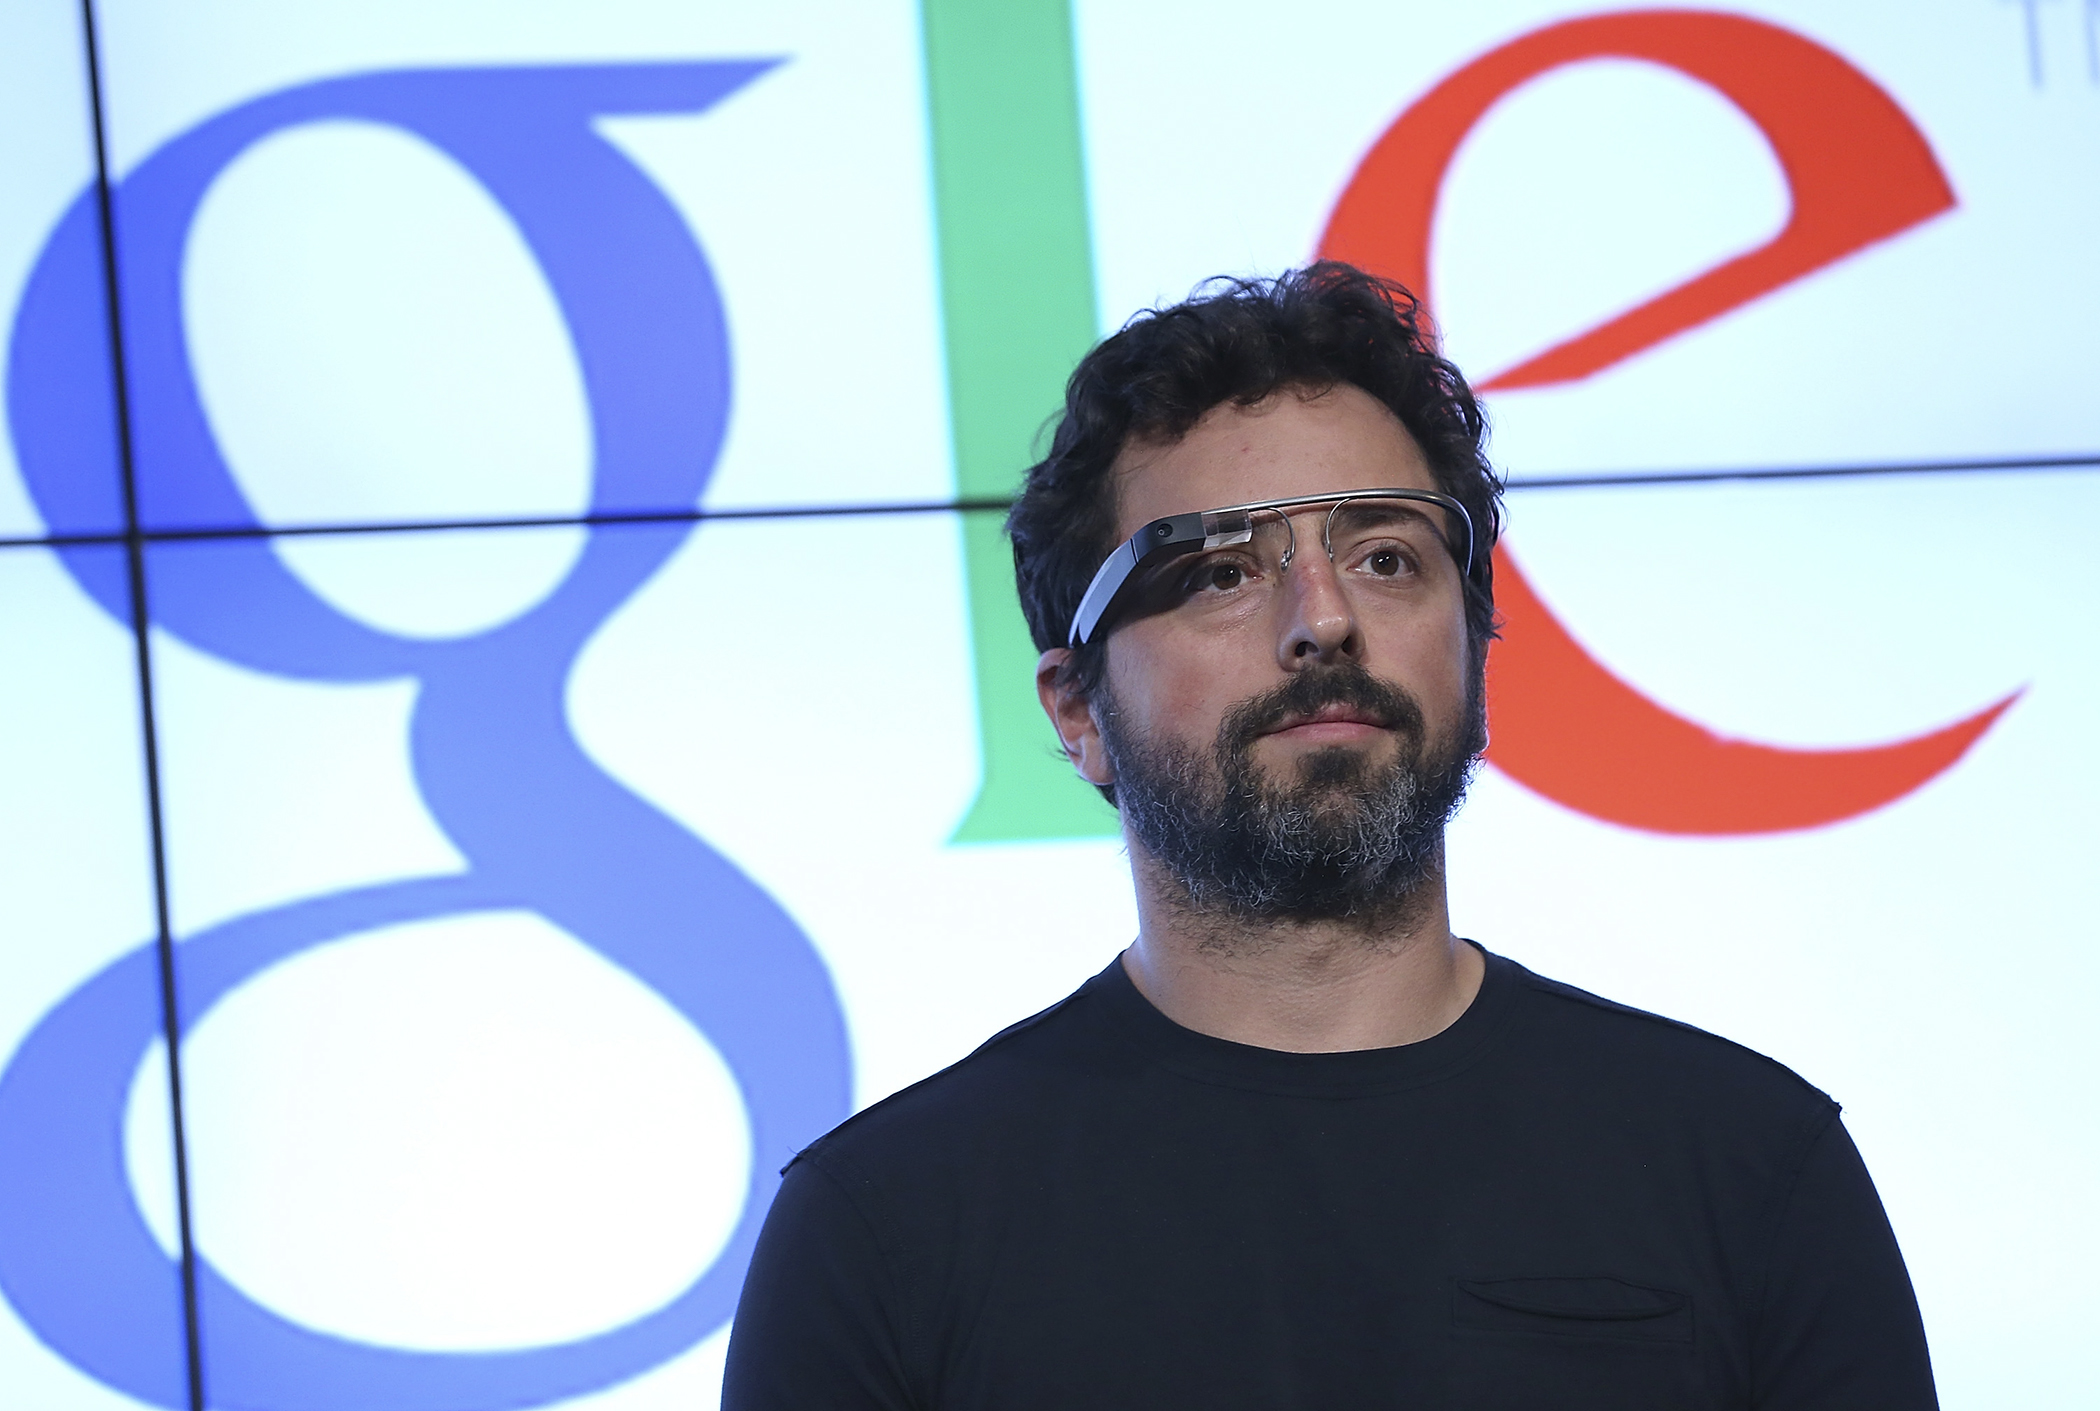 Google co-founder Sergey Brin looks on during a news conference at Google headquarters on September 25, 2012 in Mountain View, California.